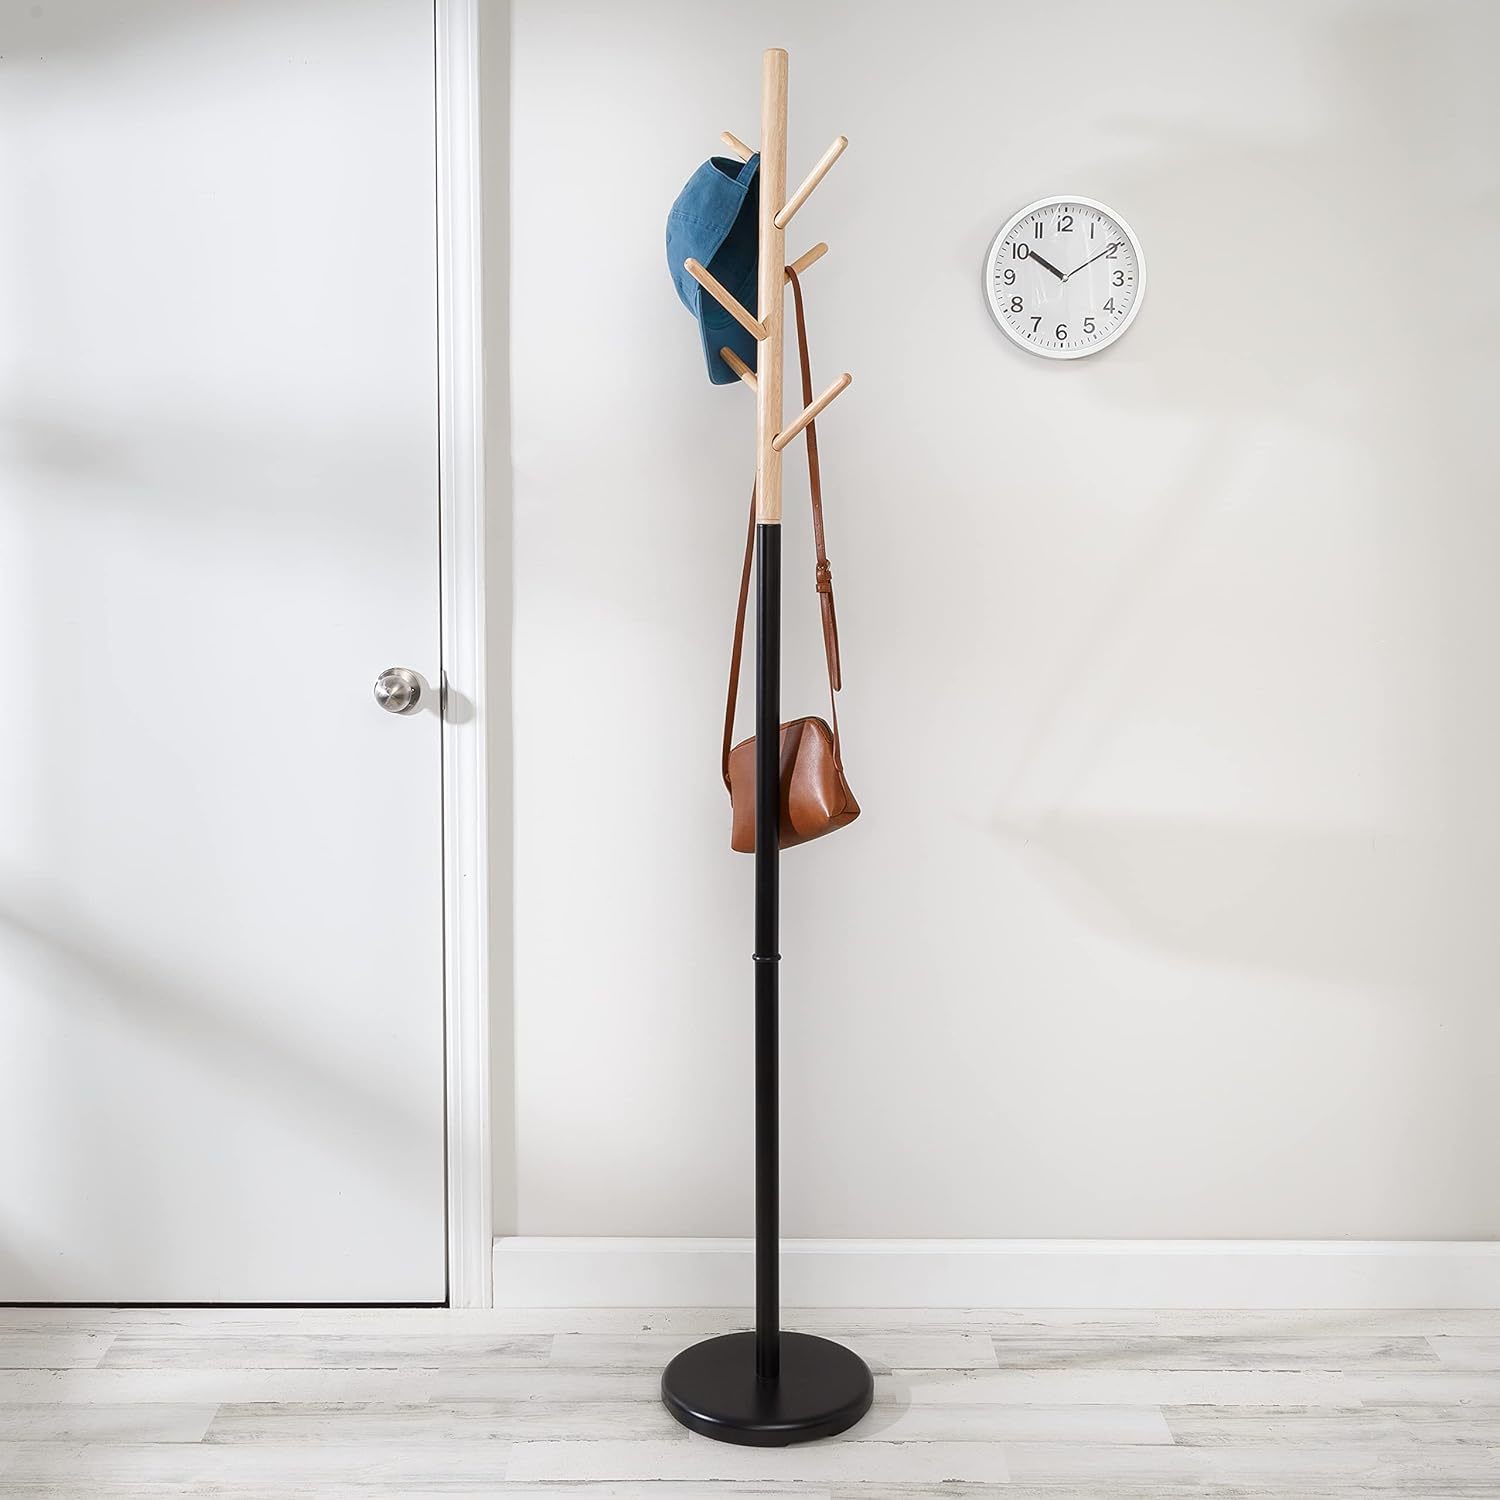 Honey-Can-Do Modern Freestanding Coat Tree Stand With Round Base,, 09527 Natural - $38.99